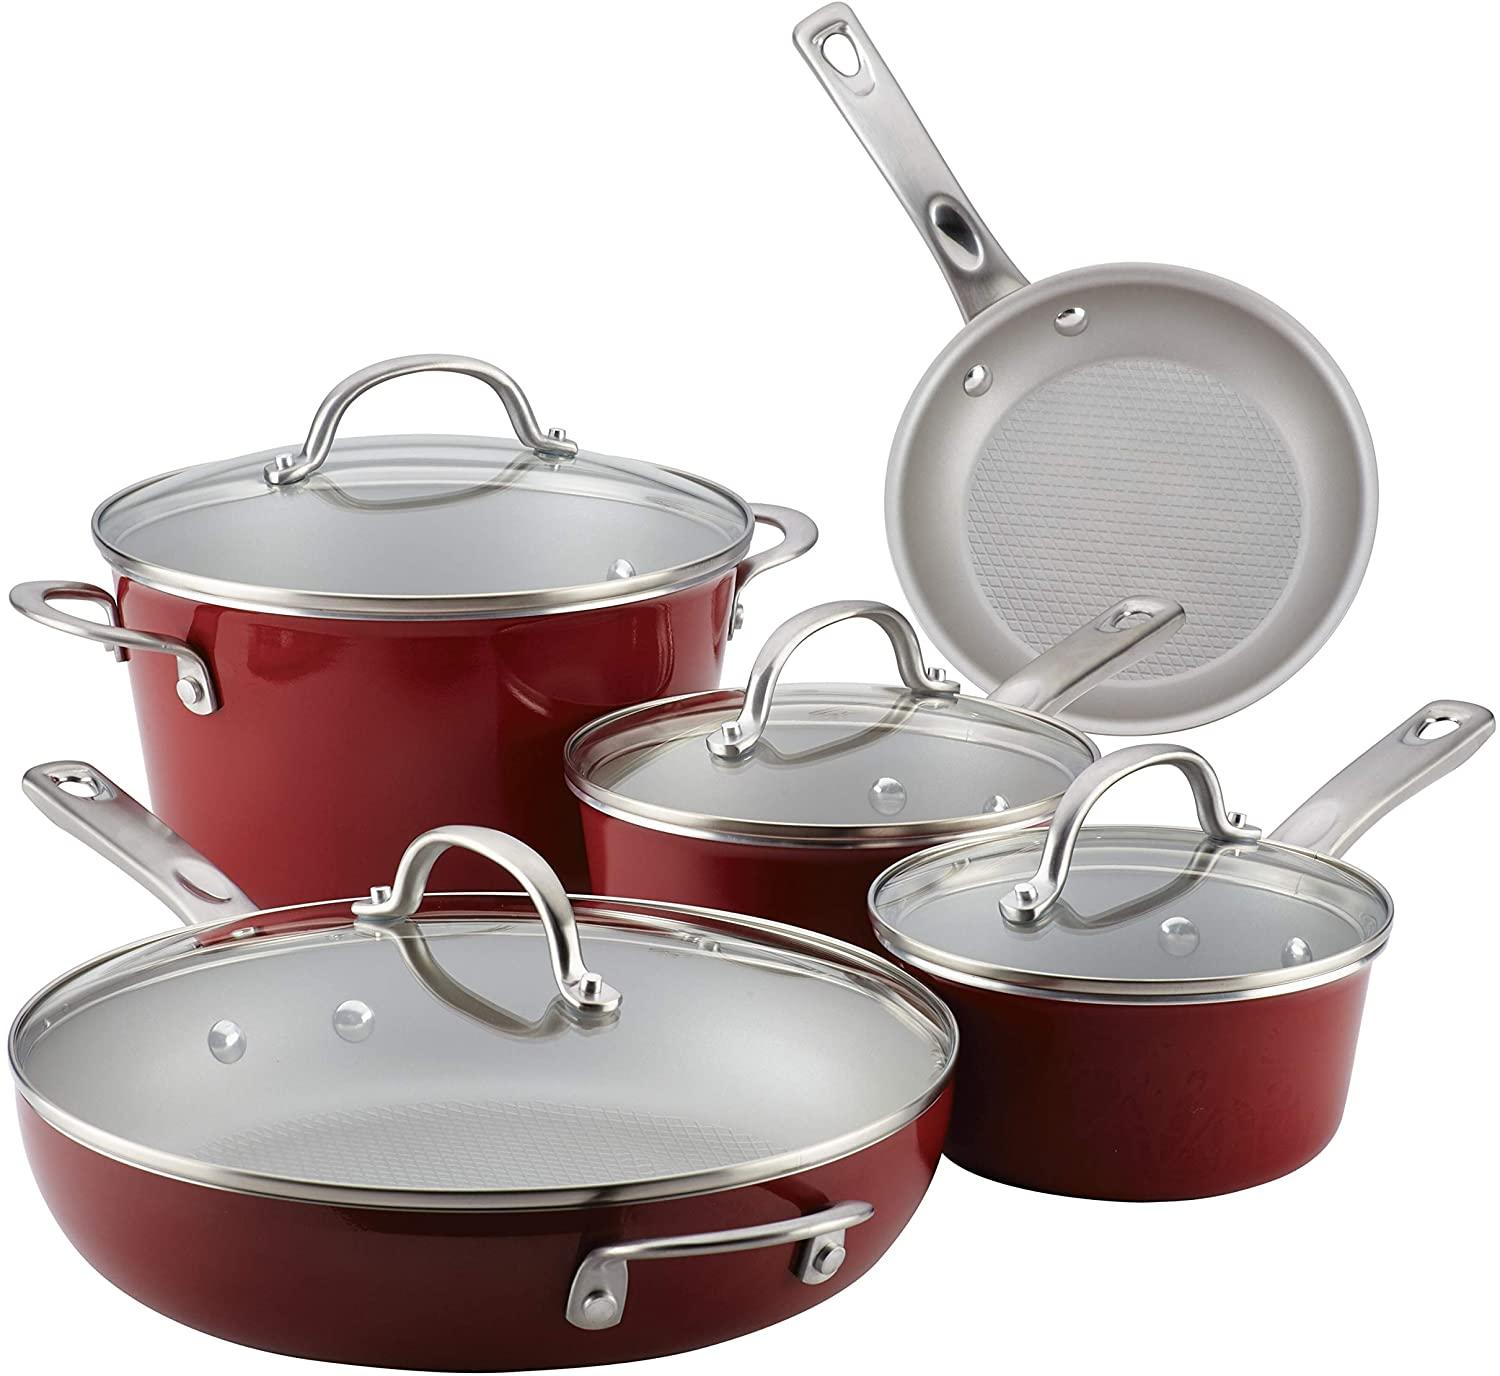 Ayesha Curry Home Collection Nonstick Cookware Pots and Pans Set for $64.99 Shipped